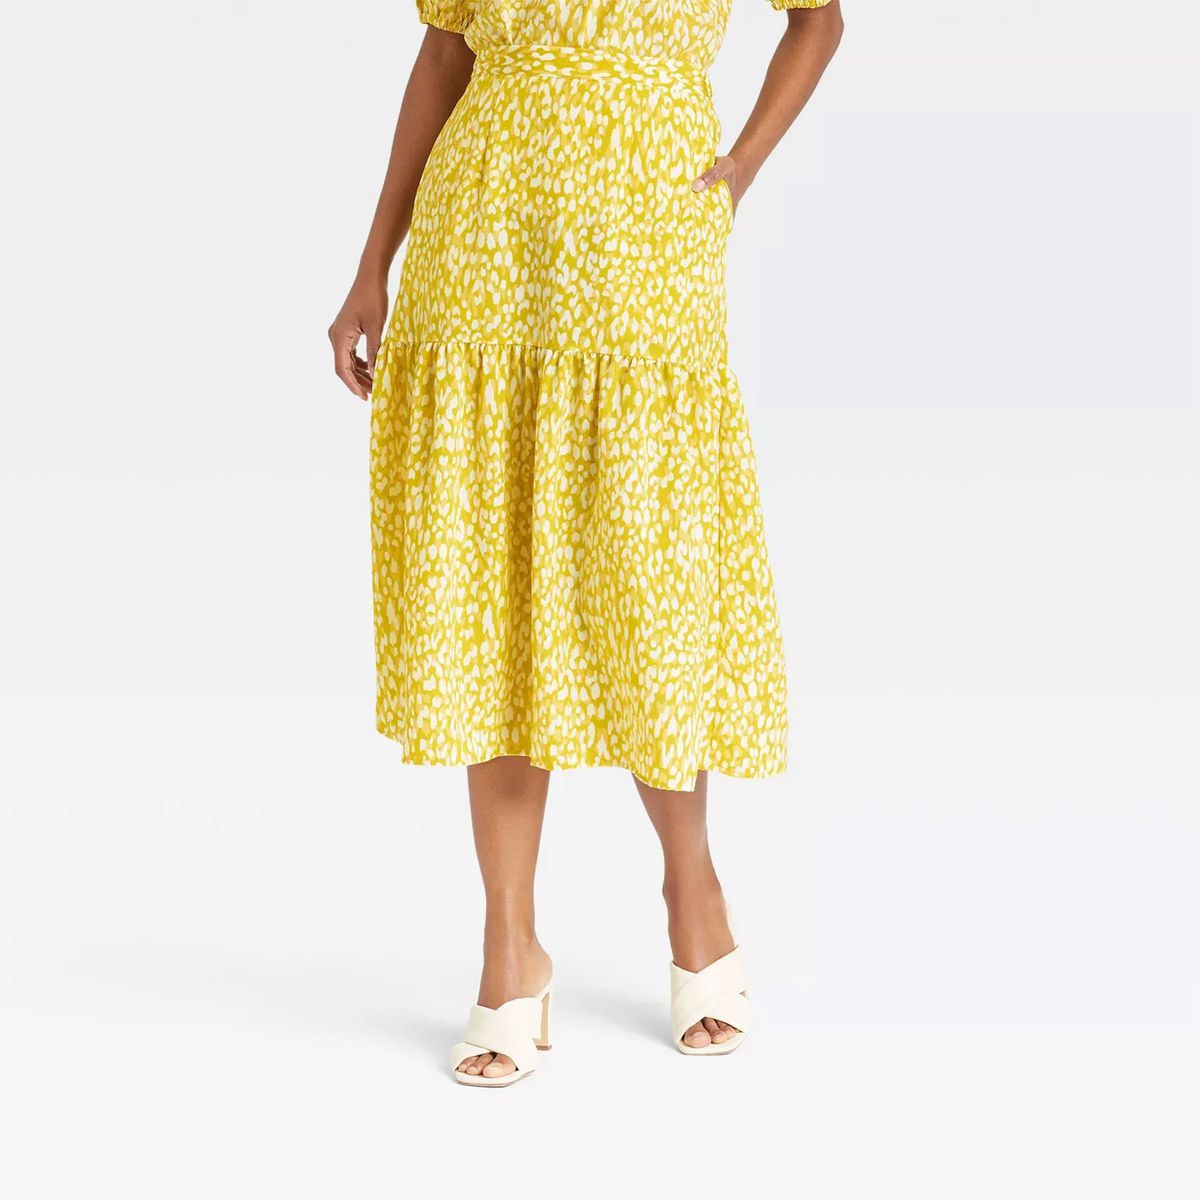 Women's Tiered Skirt - Who What Wear™ Yellow Leopard Print